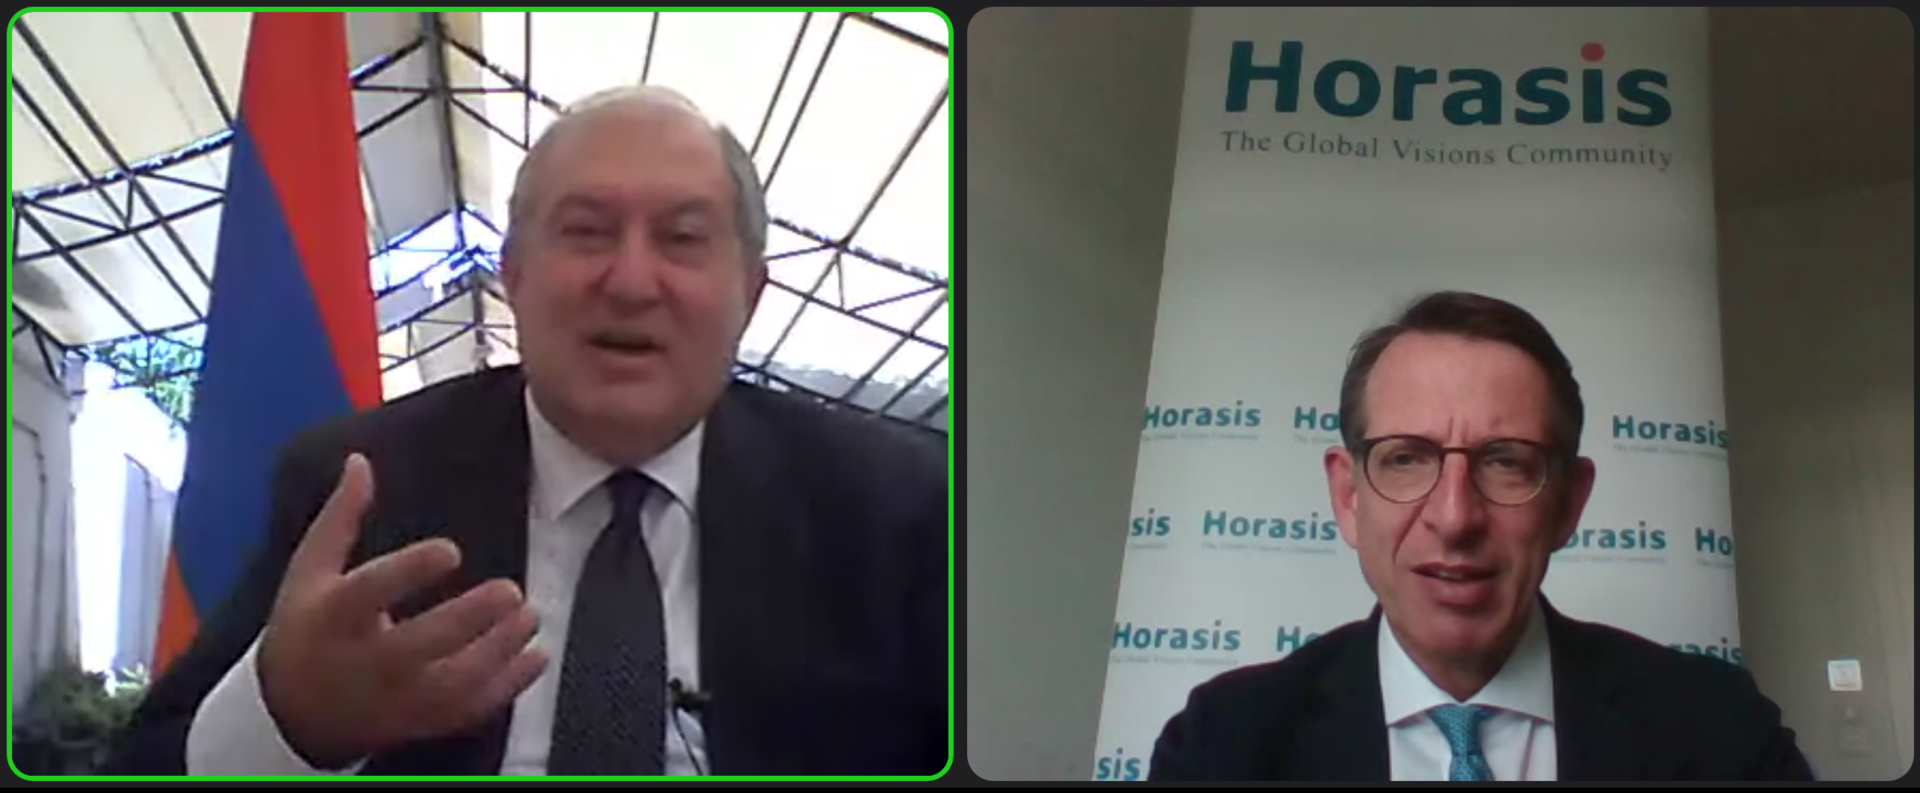 https://horasis.org/wp-content/uploads/Special-Address-by-Armen-Sarkissian-President-of-Armenia-chaired-by-Frank-Jürgen-Richter.png